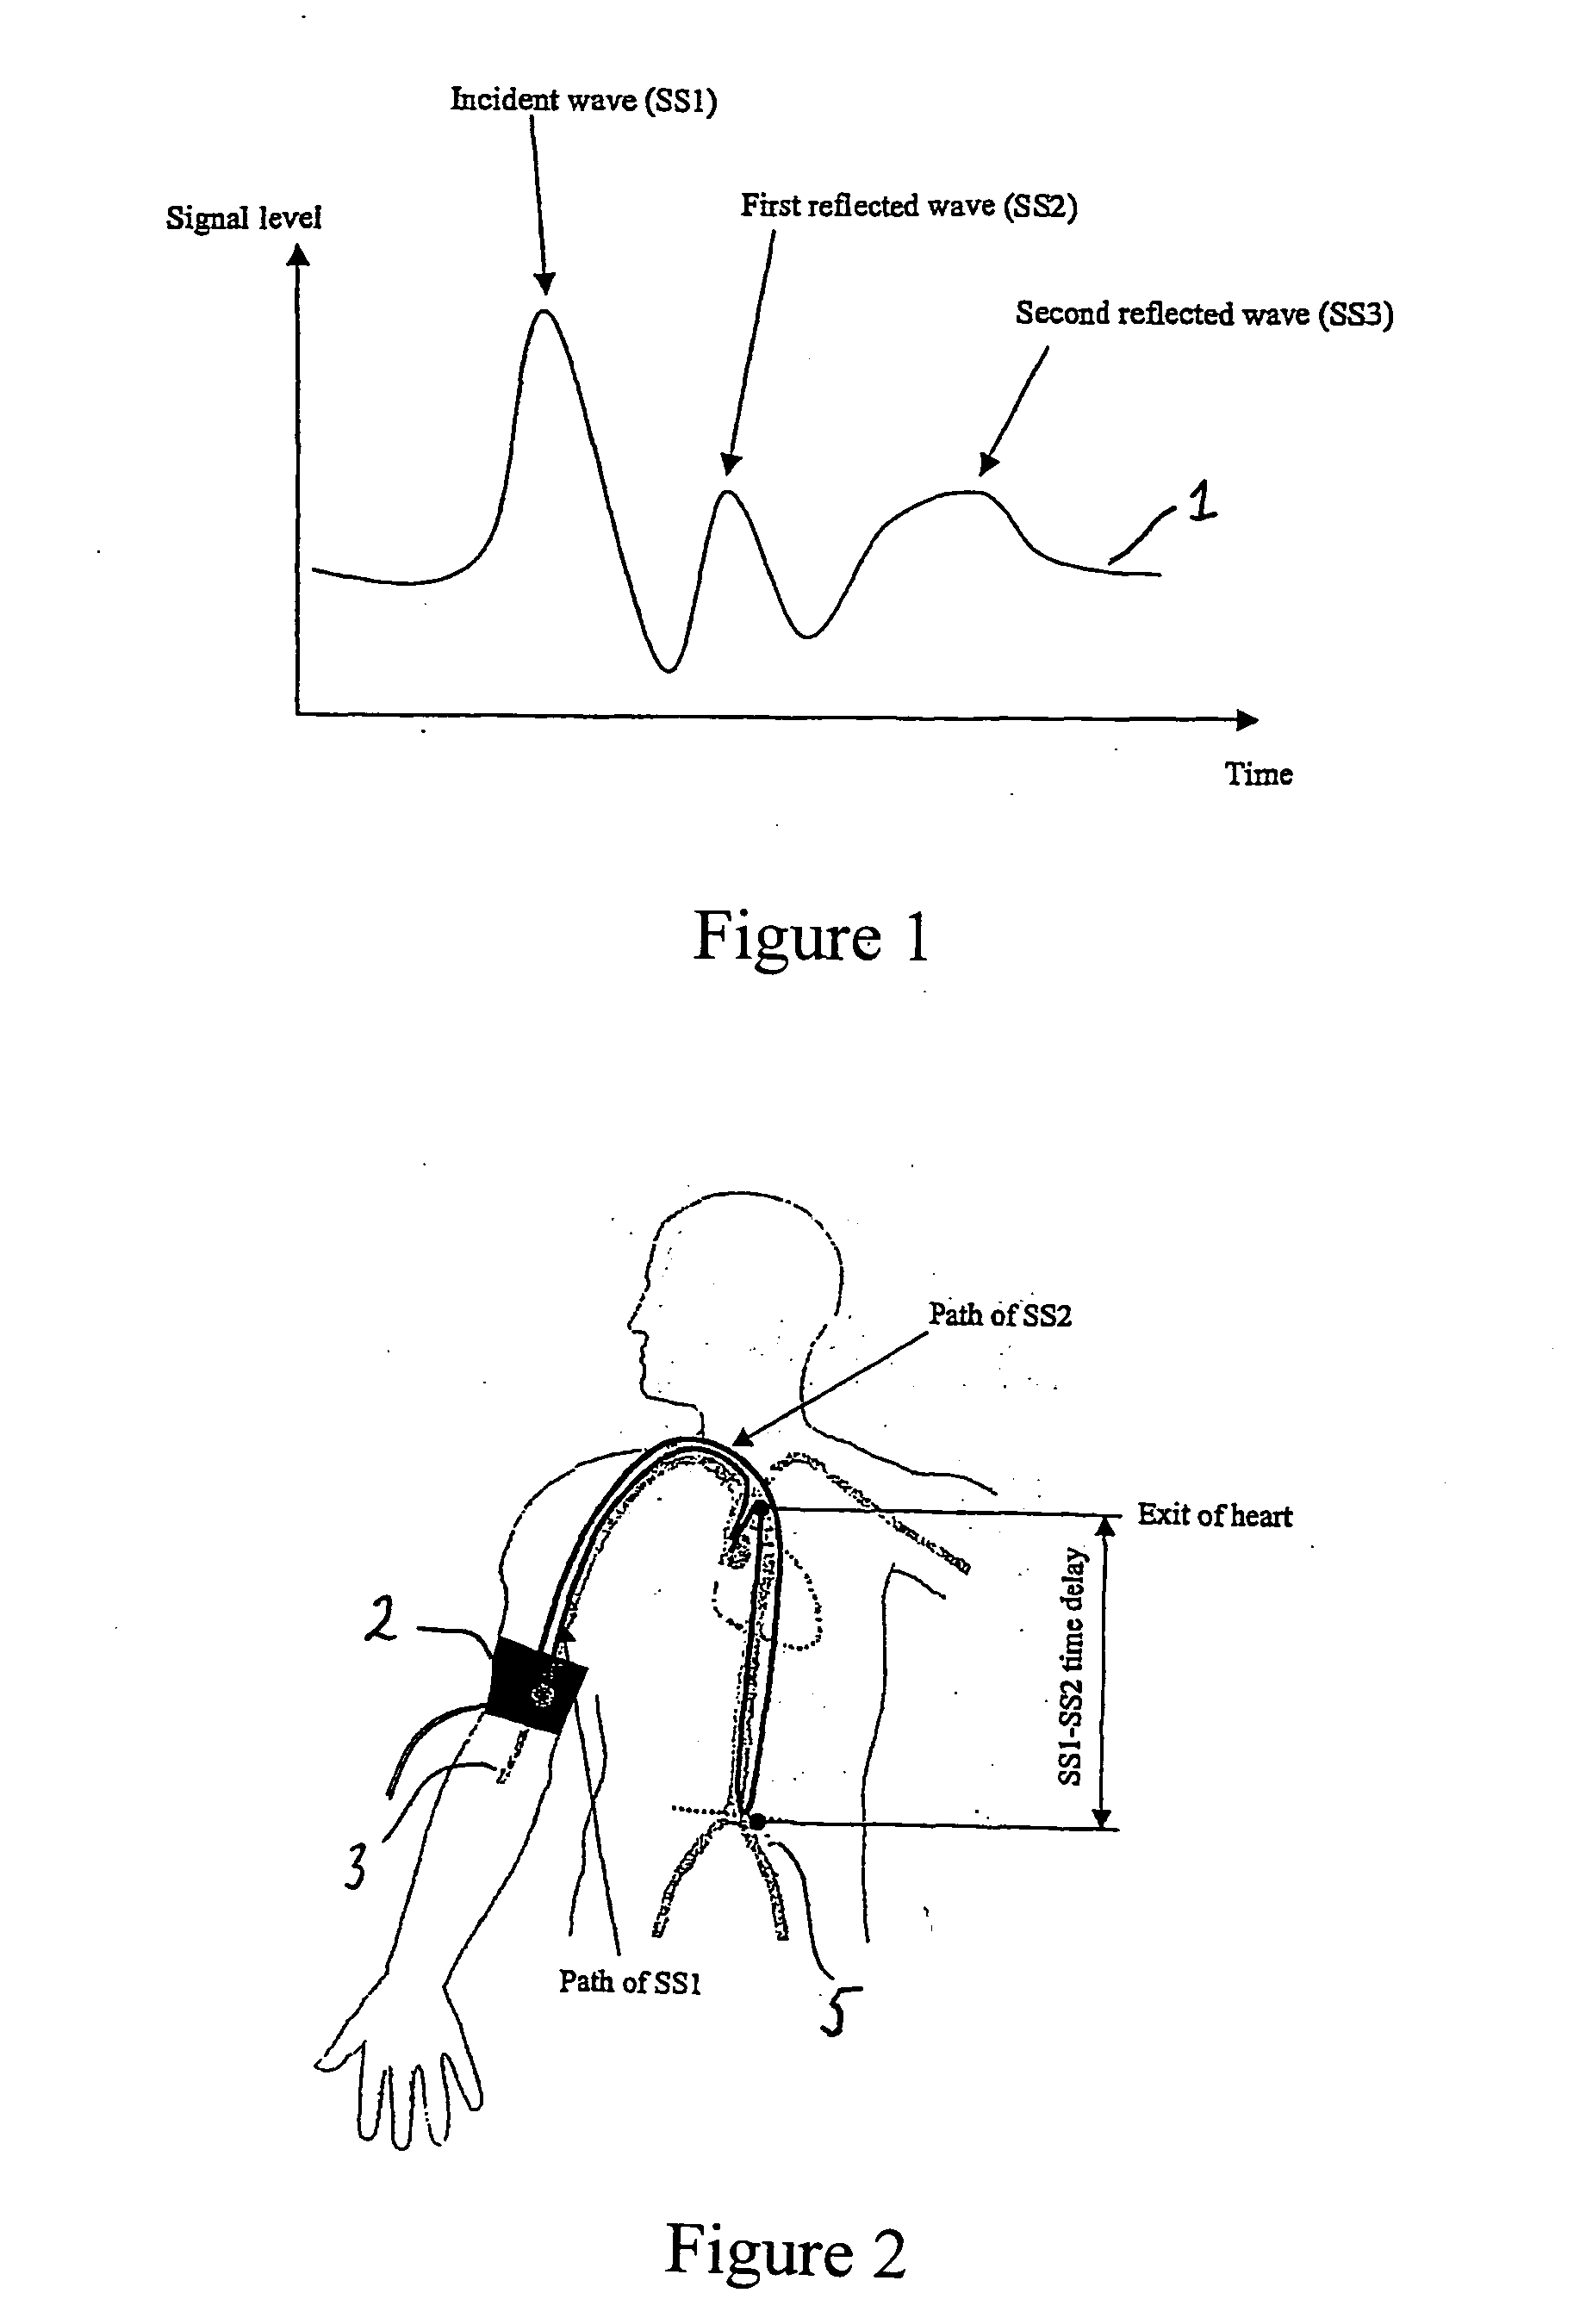 System and method for non-invasive cardiovascular assessment from supra-systolic signals obtained with a wideband external pulse transducer in a blood pressure cuff